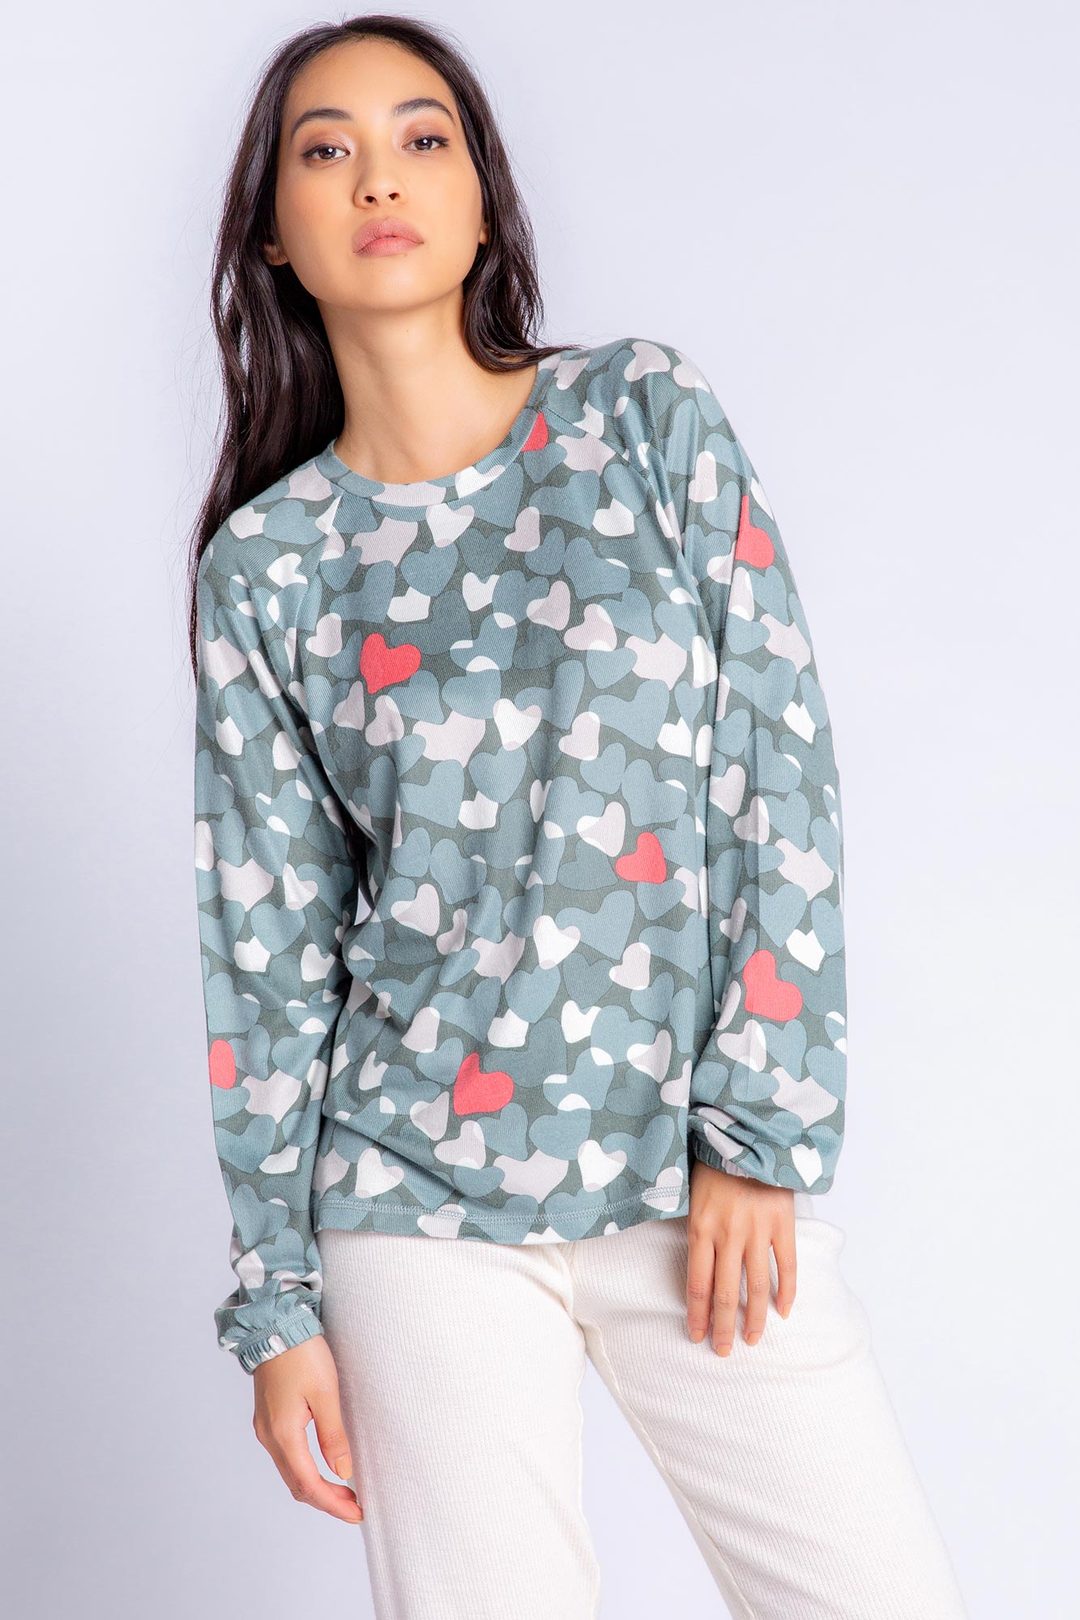 PJ Salvage Love In Camo Long Sleeve Top Color: Sage Size: XS at Petticoat Lane  Greenwich, CT